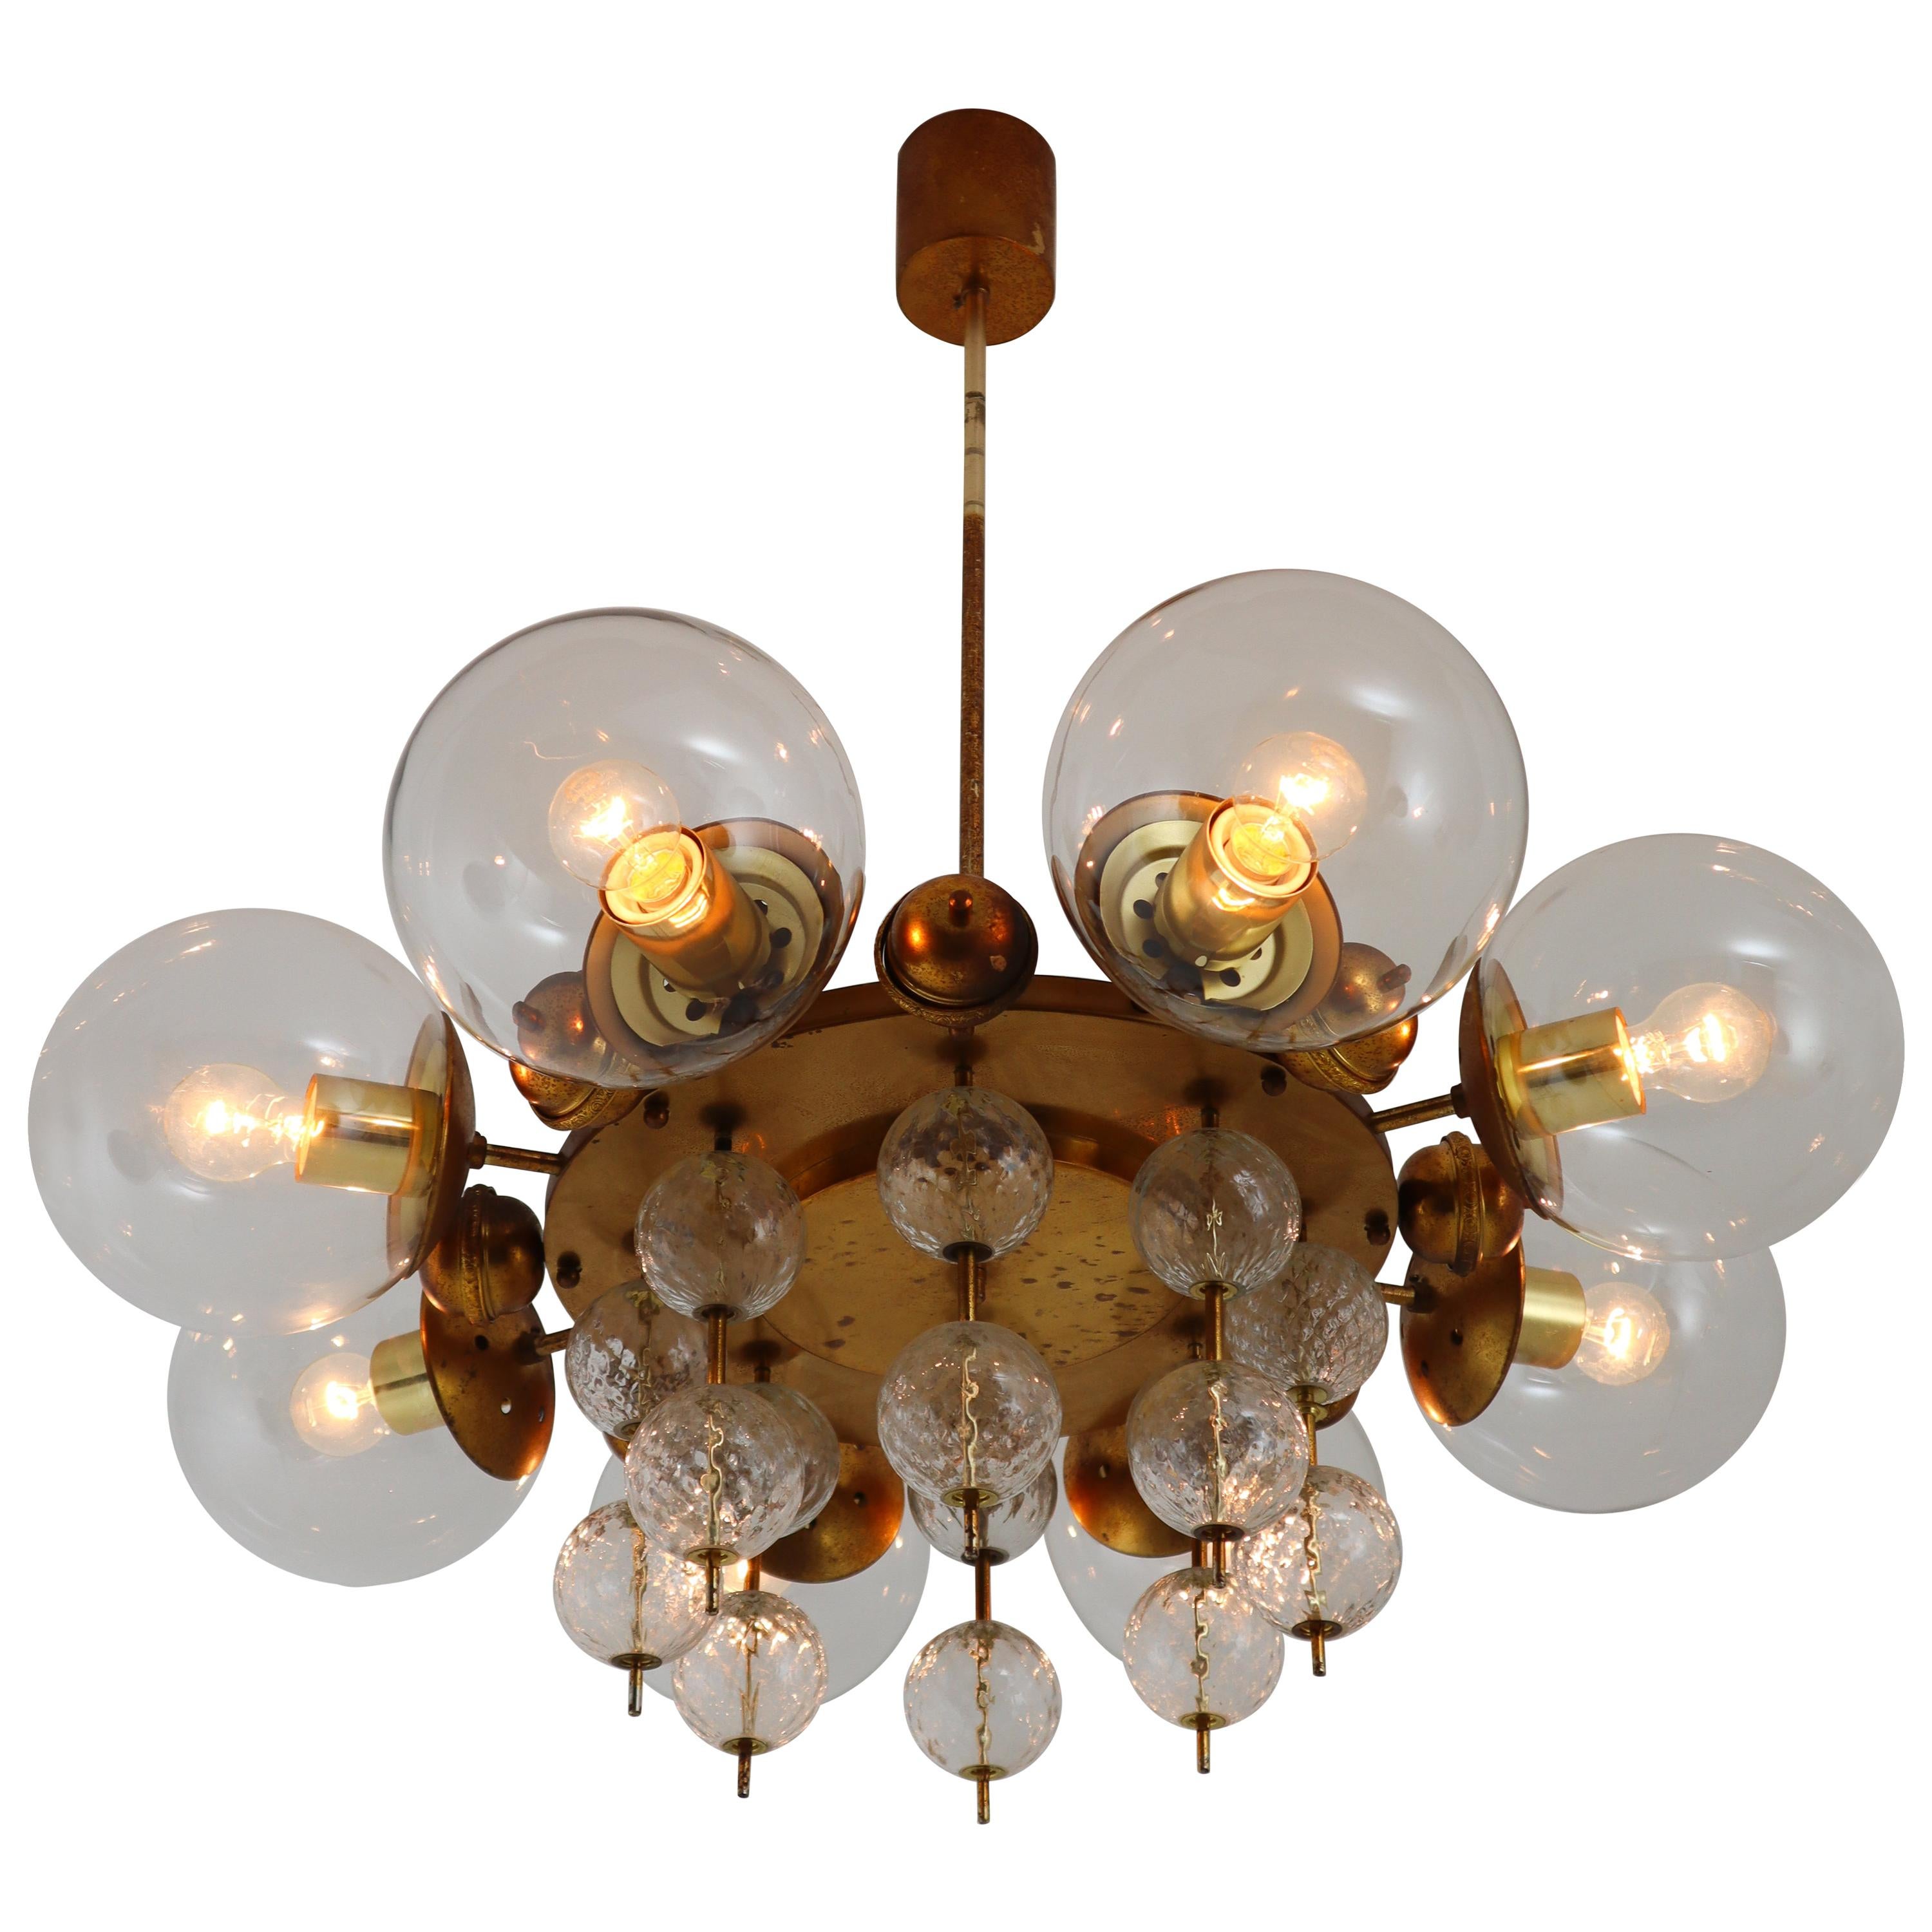 Midcentury Chandelier with Patinated Brass Fixture, Europe, 1950s